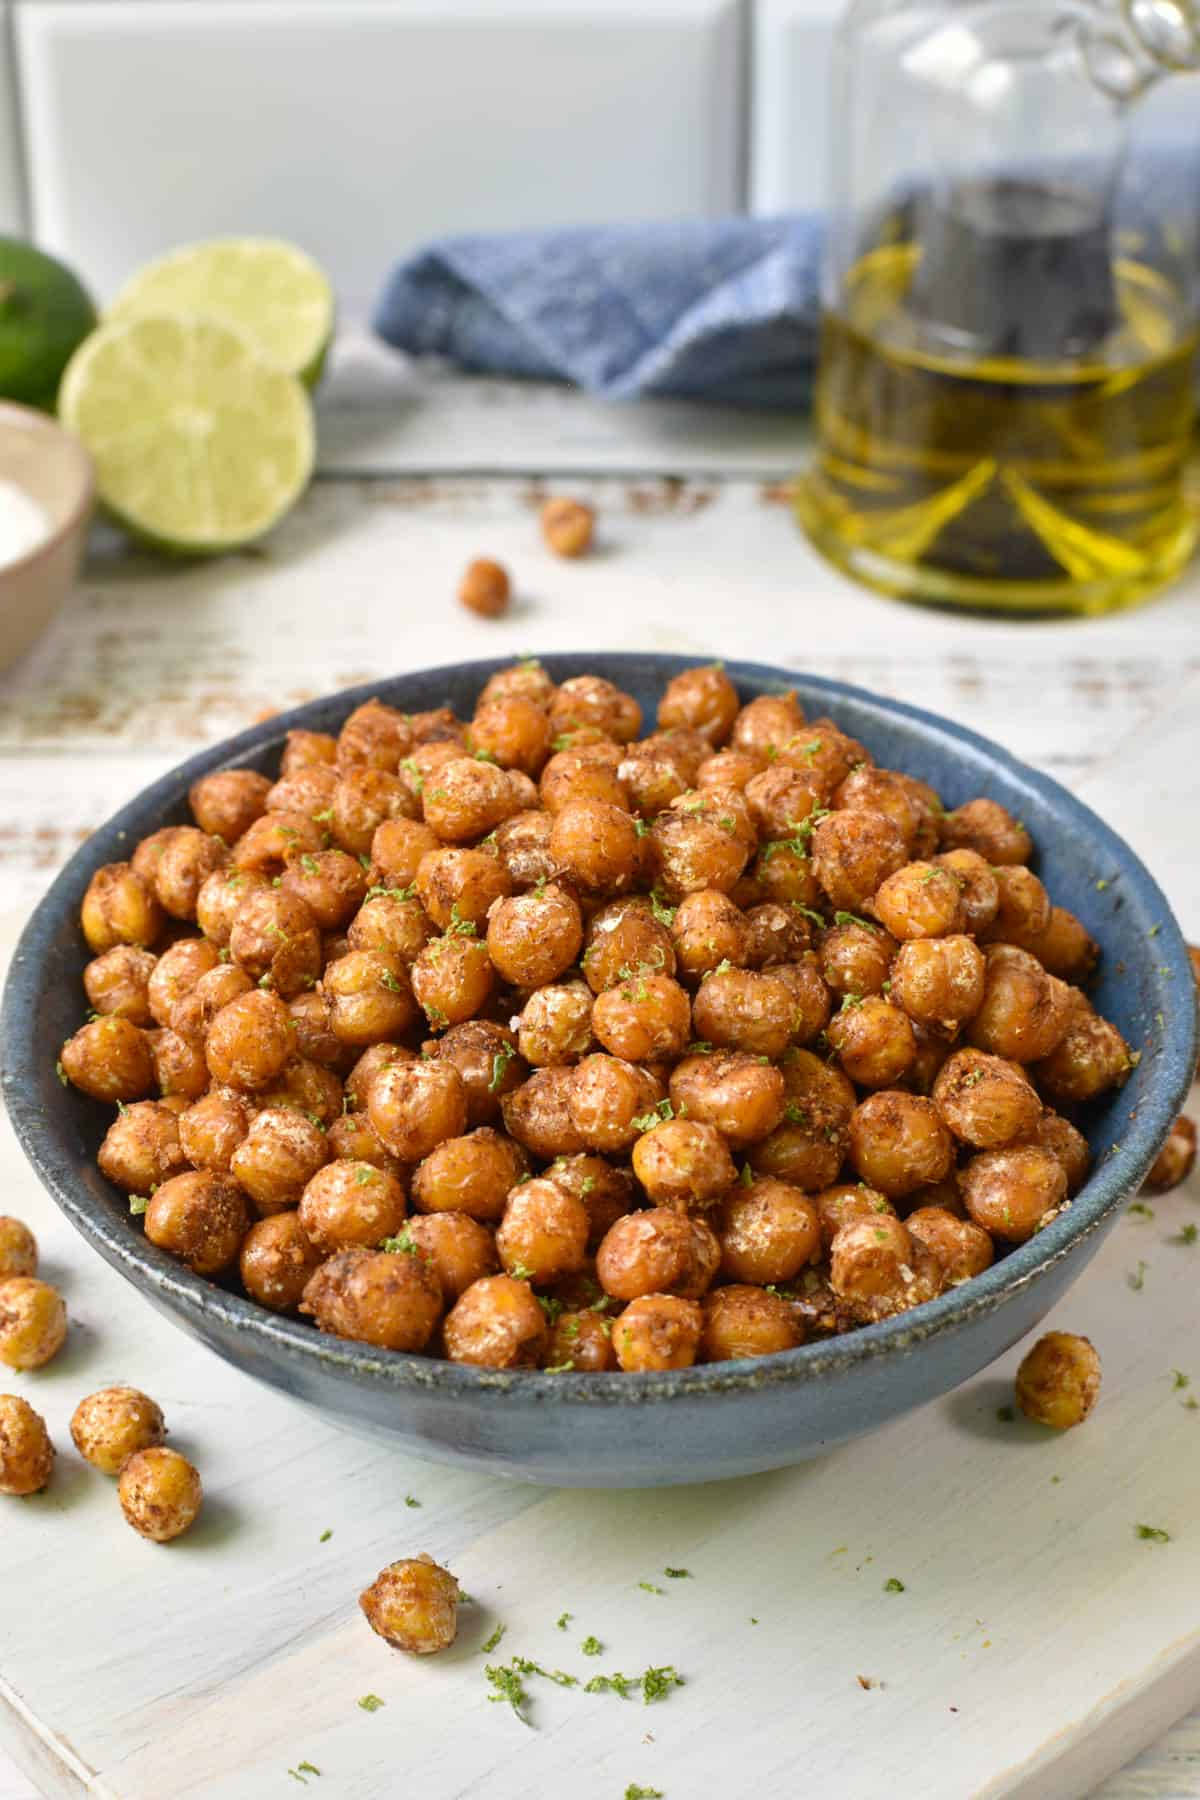 Sauteed chickpeas in a blue bowl.